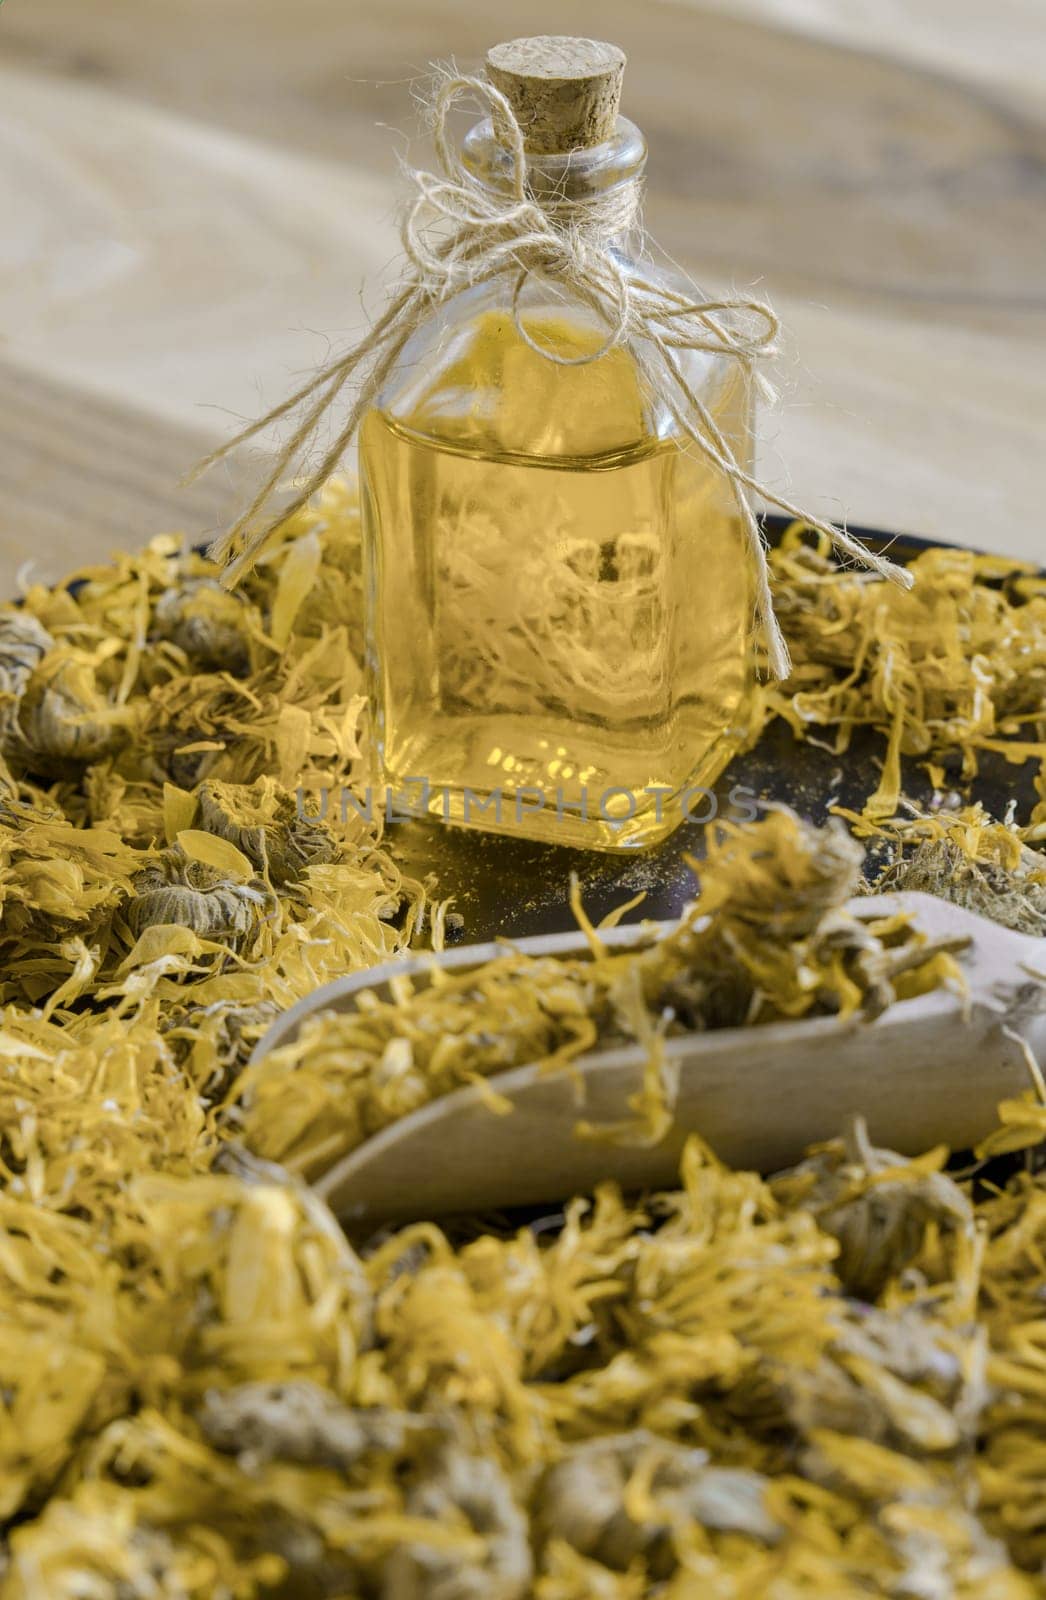 dried calendula flowers, Calendula officinalis, medicinal plant for therapeutic use, in a black tray with a bottle of calendula essential oil.